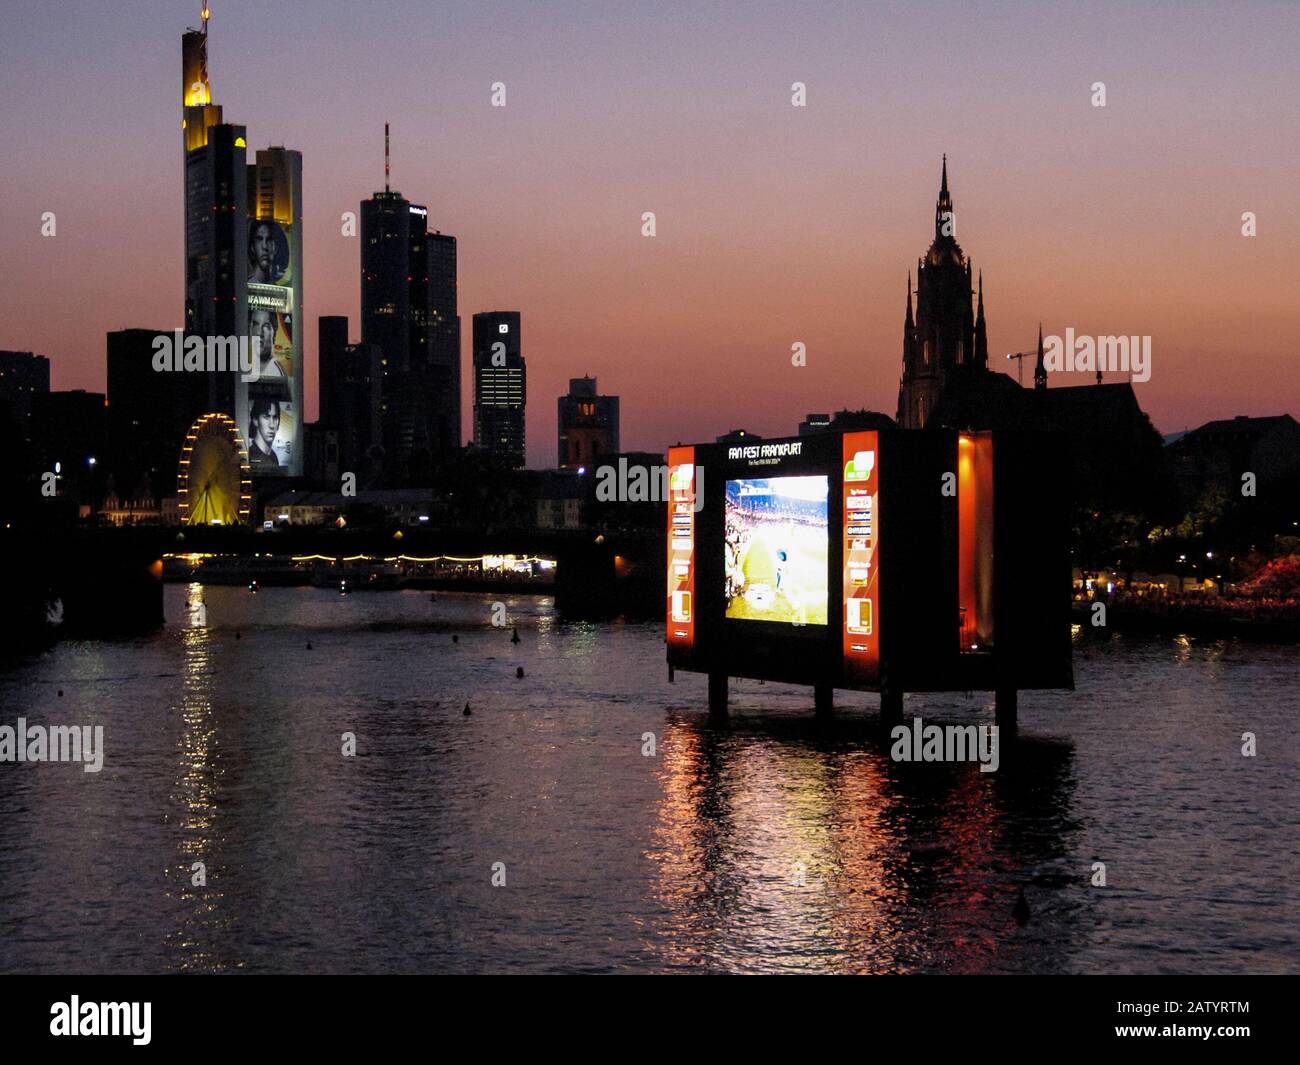 Unique big screen on the river in the Frankfurt fan zone during the 2006  Football World Cup in Germany Stock Photo - Alamy